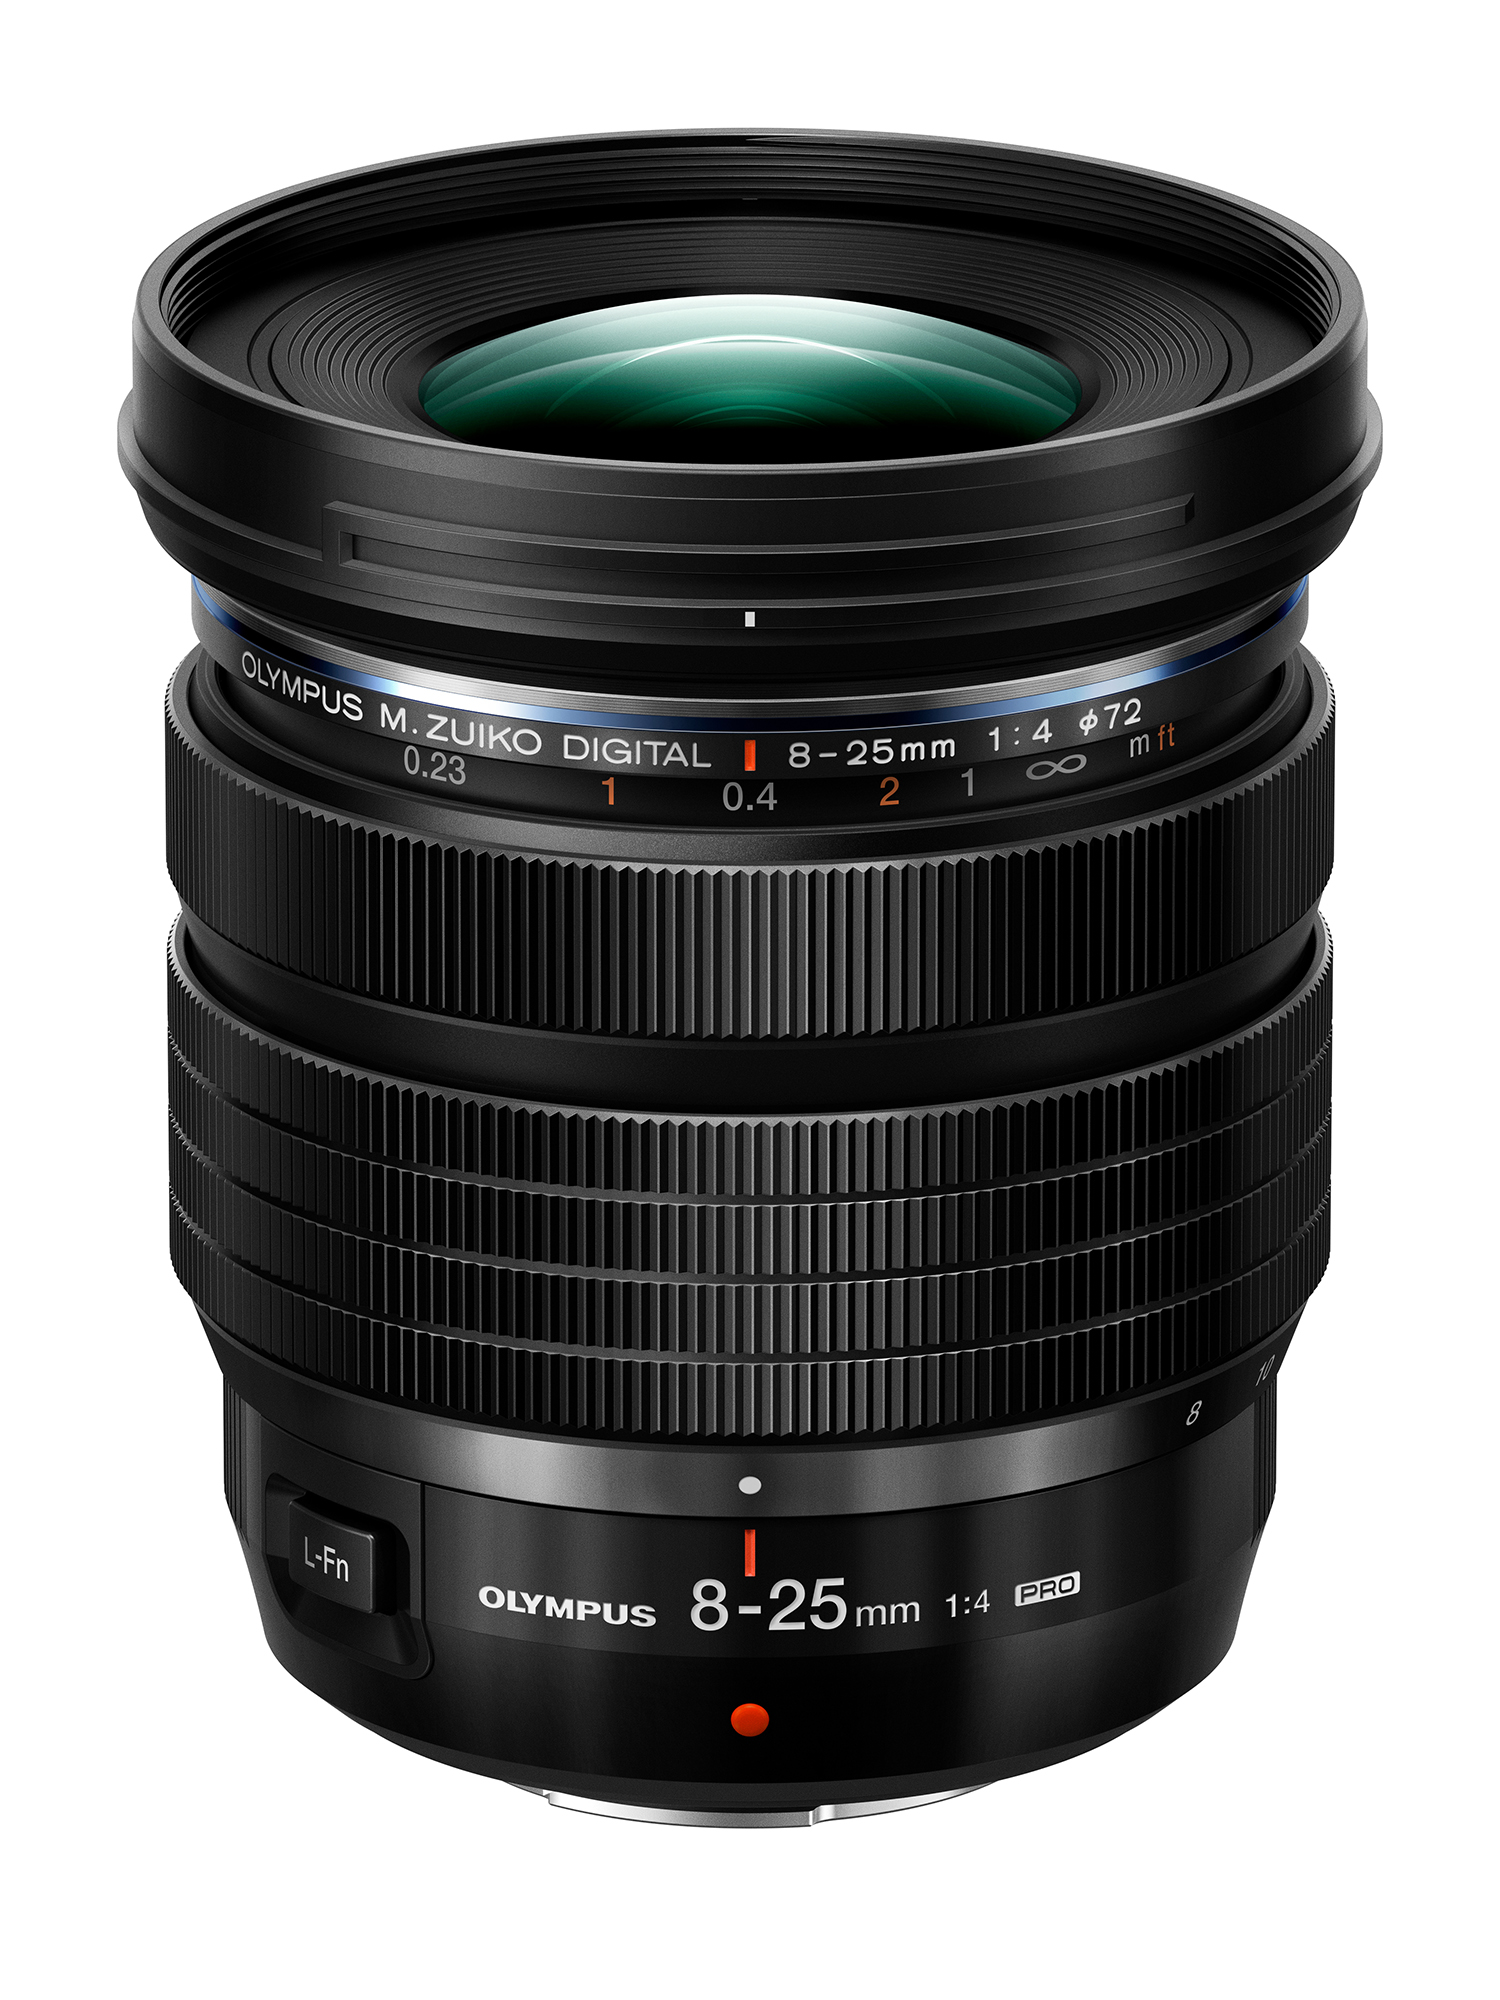 Olympus 8-25mm perfect for travel, offering flexibility and superb 